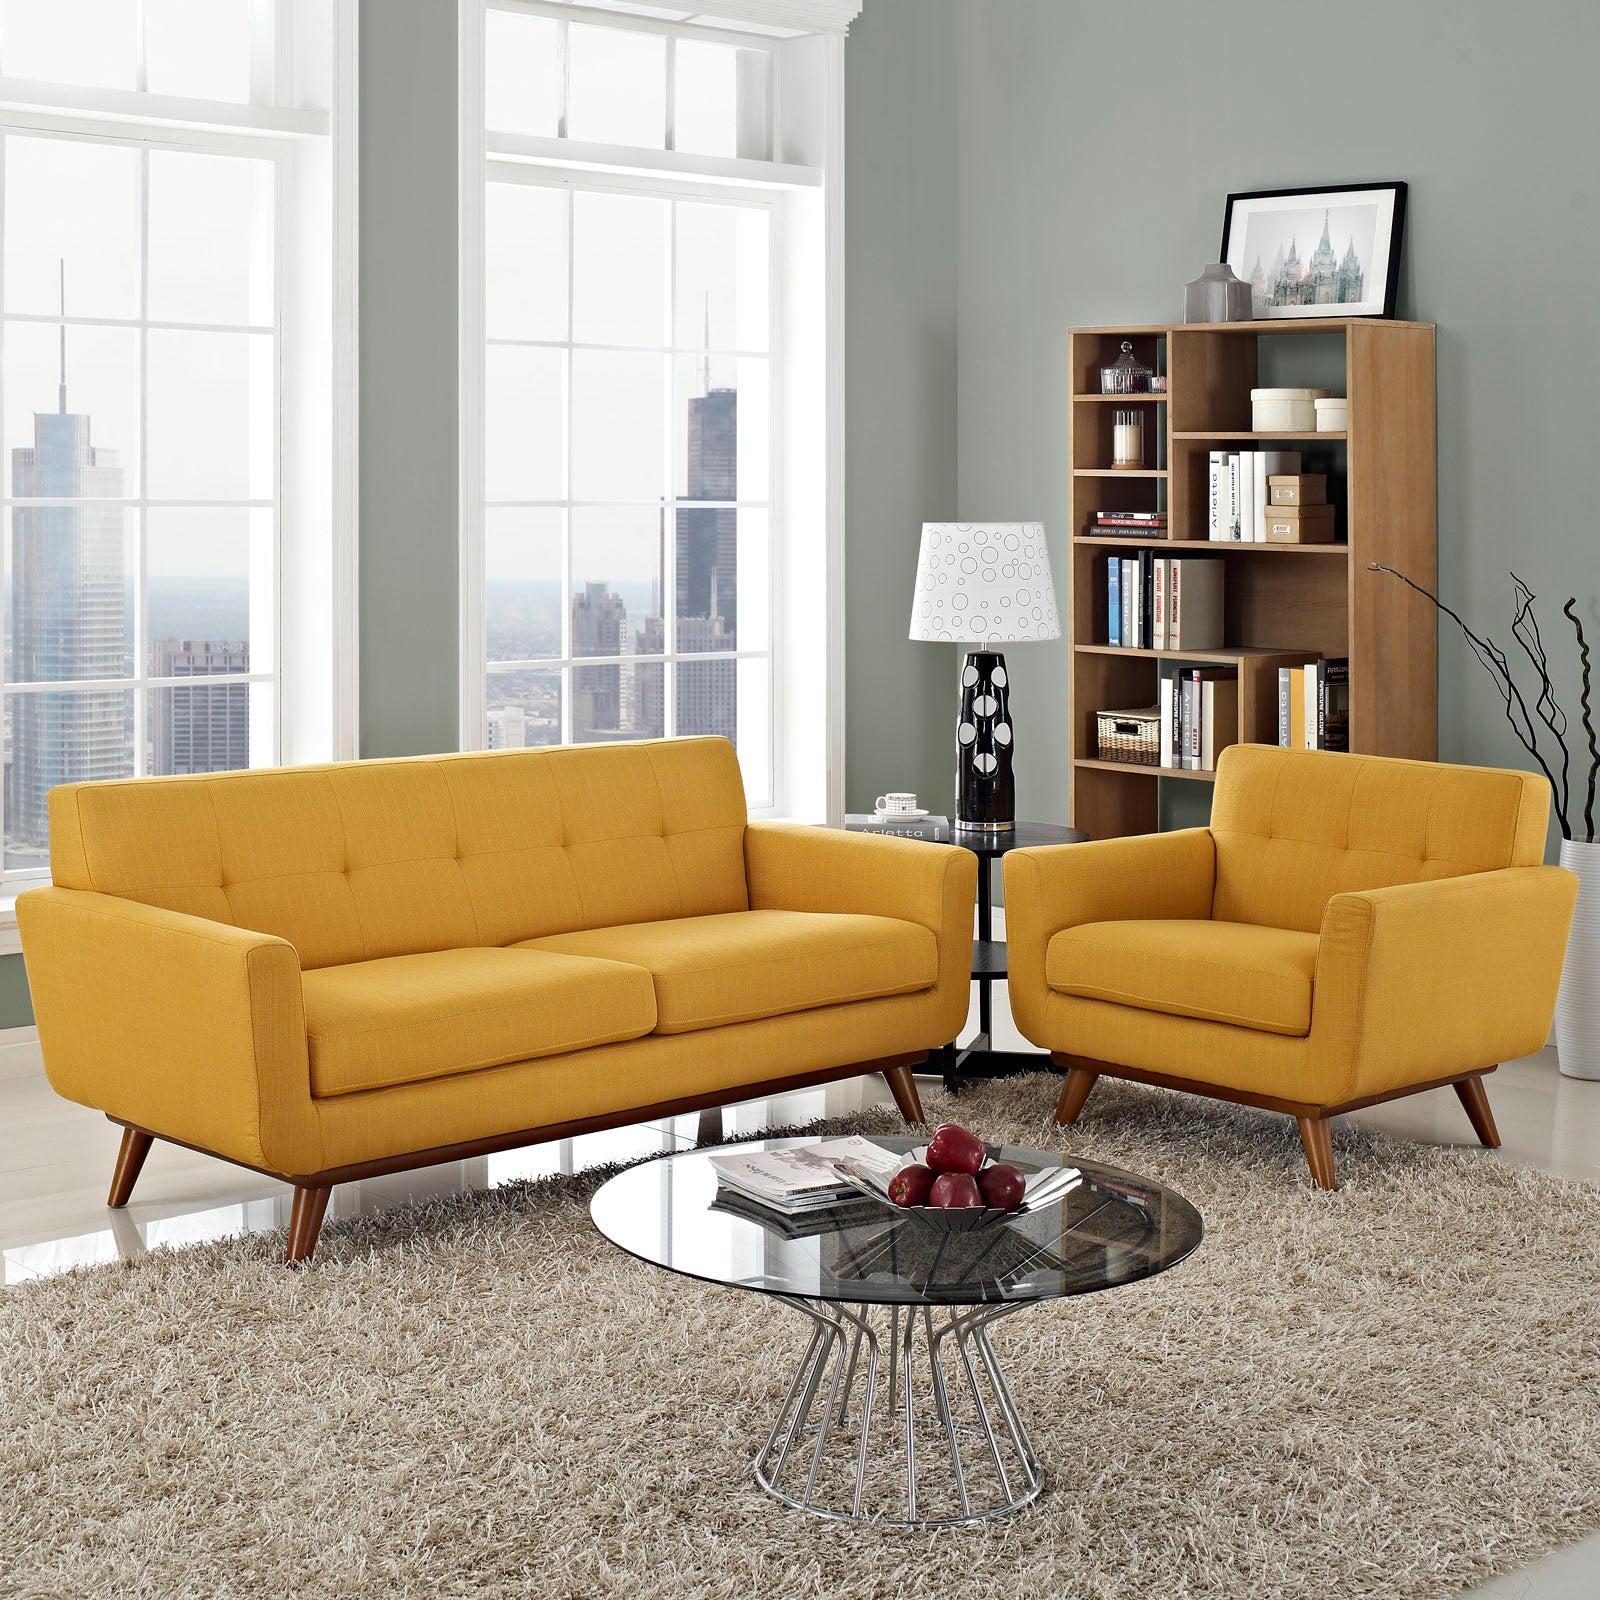 Modway Living Room Sets - Engage Armchair and Loveseat Set of 2 Citrus